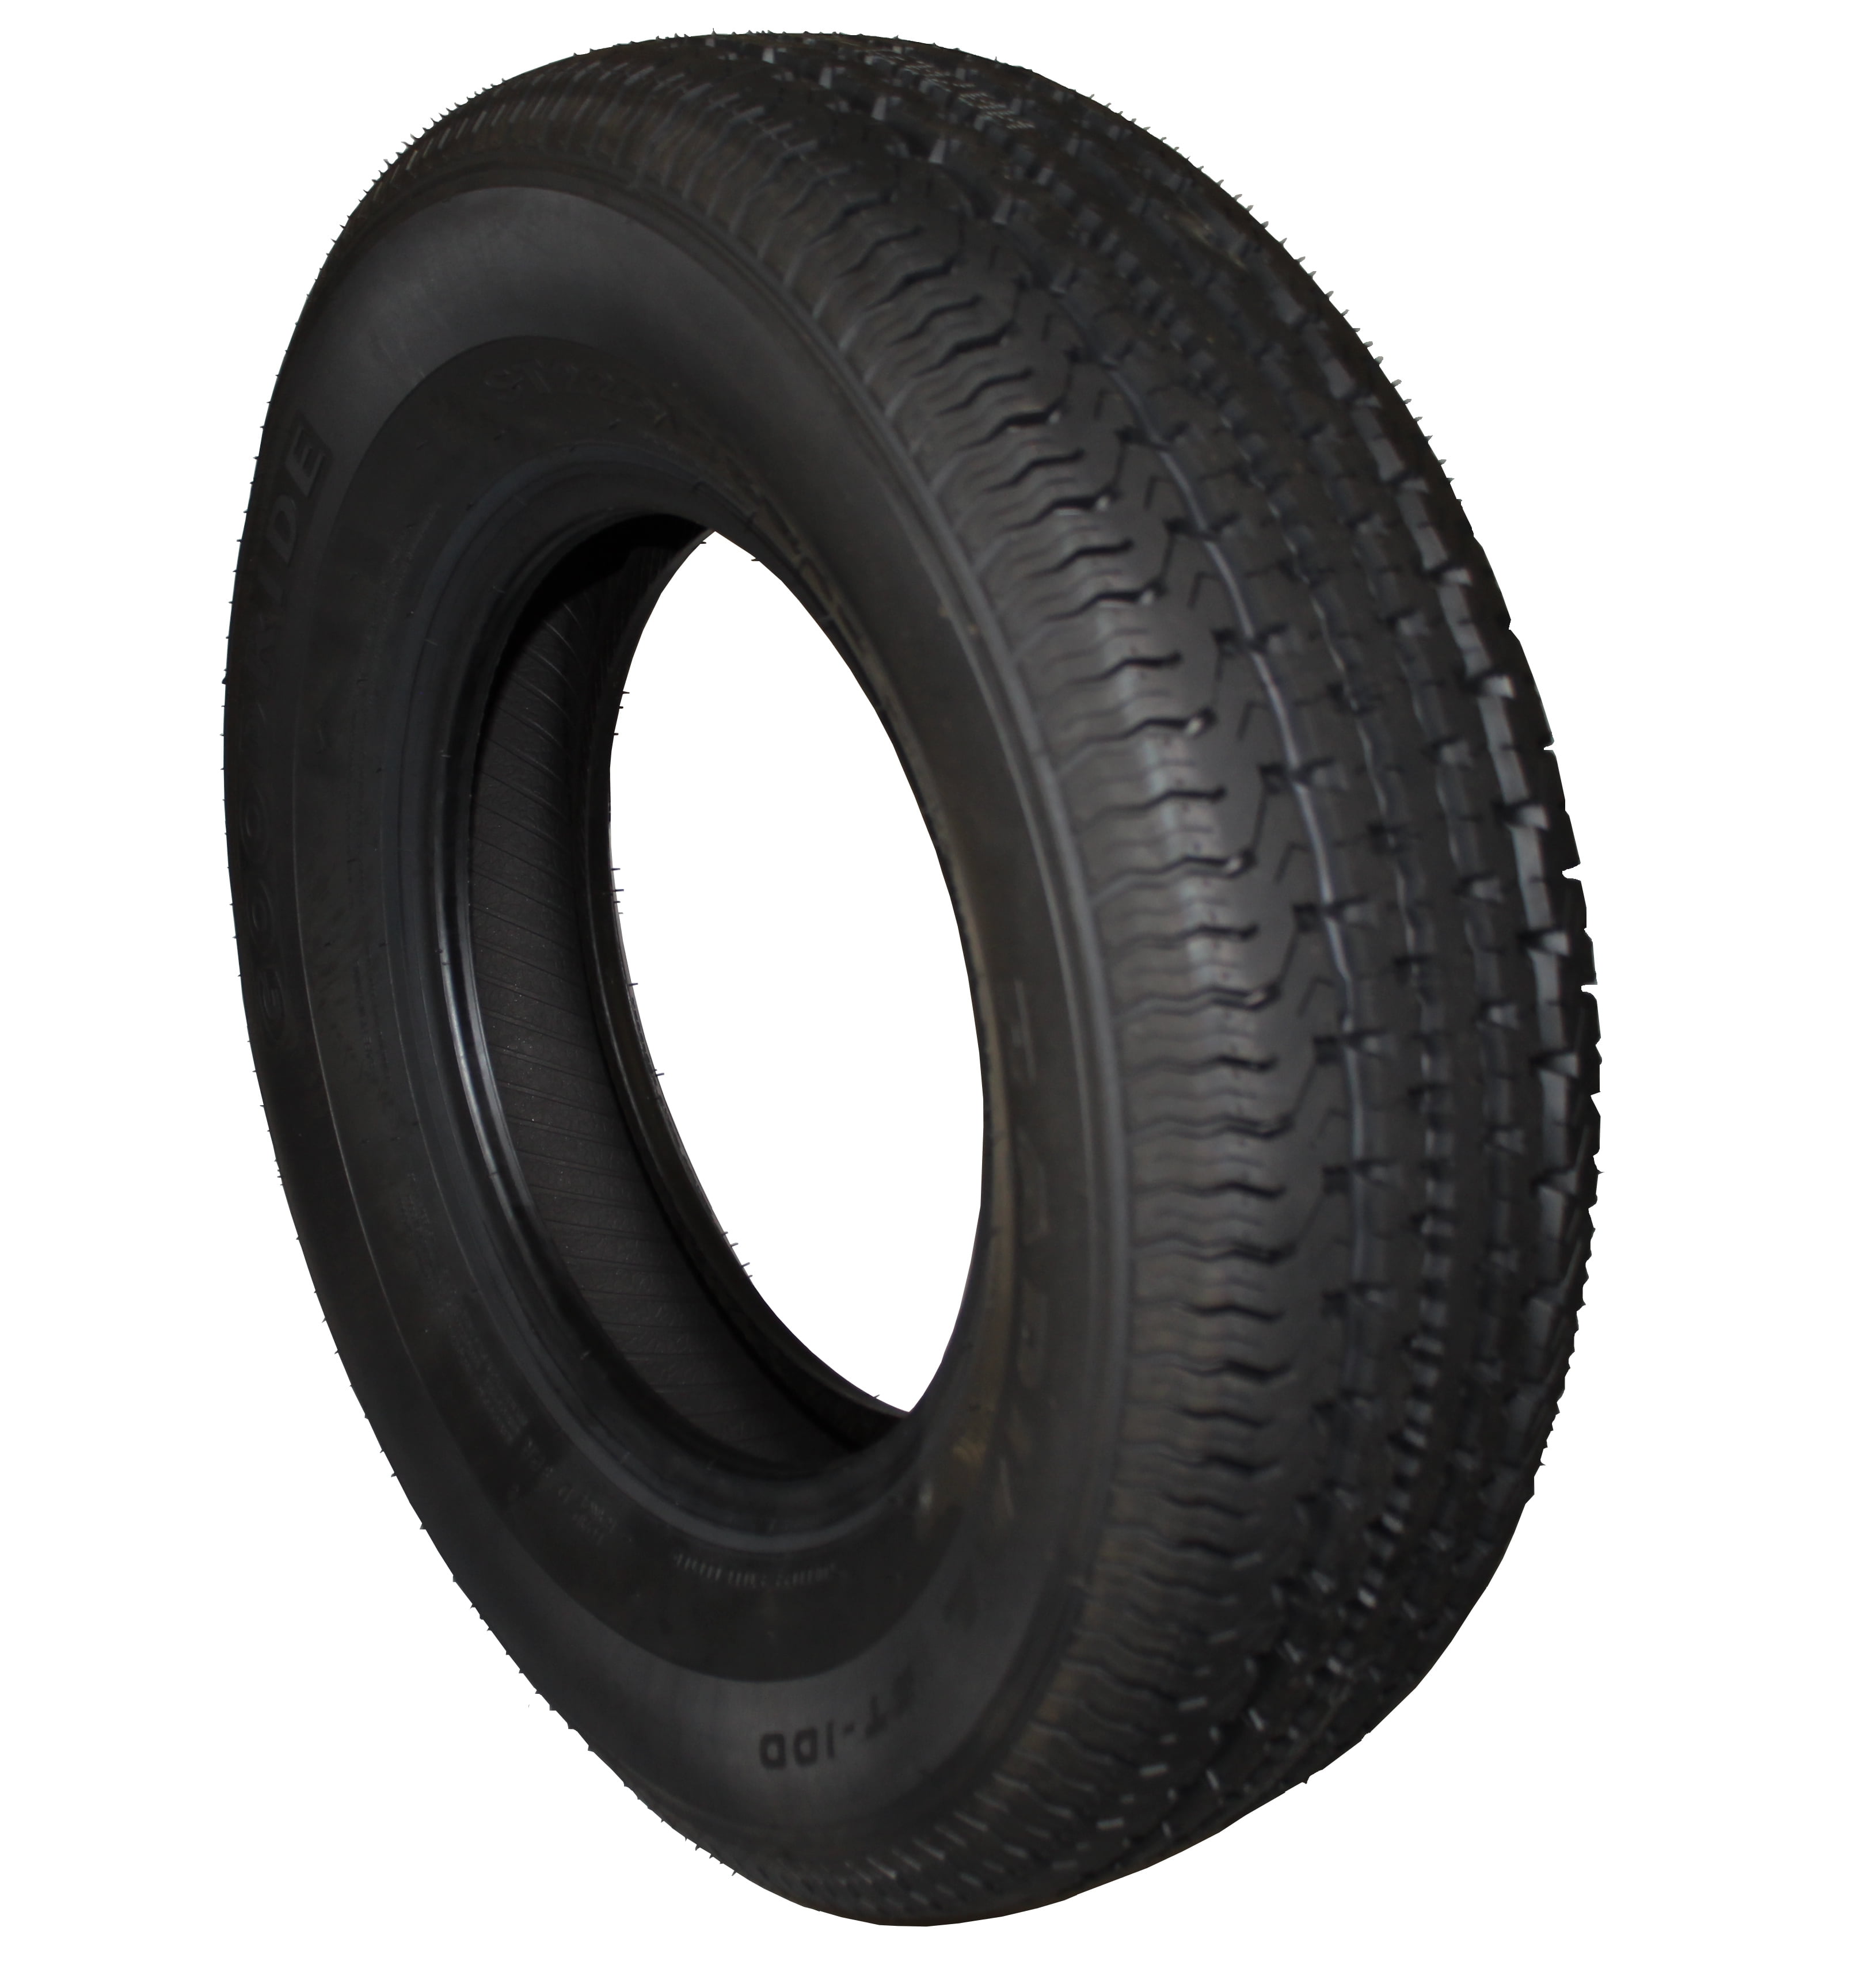 7-14.5 Low Boy,RV,Camper,Utility 12 ply Tubeless Trailer Tires FOUR 7x14.5 